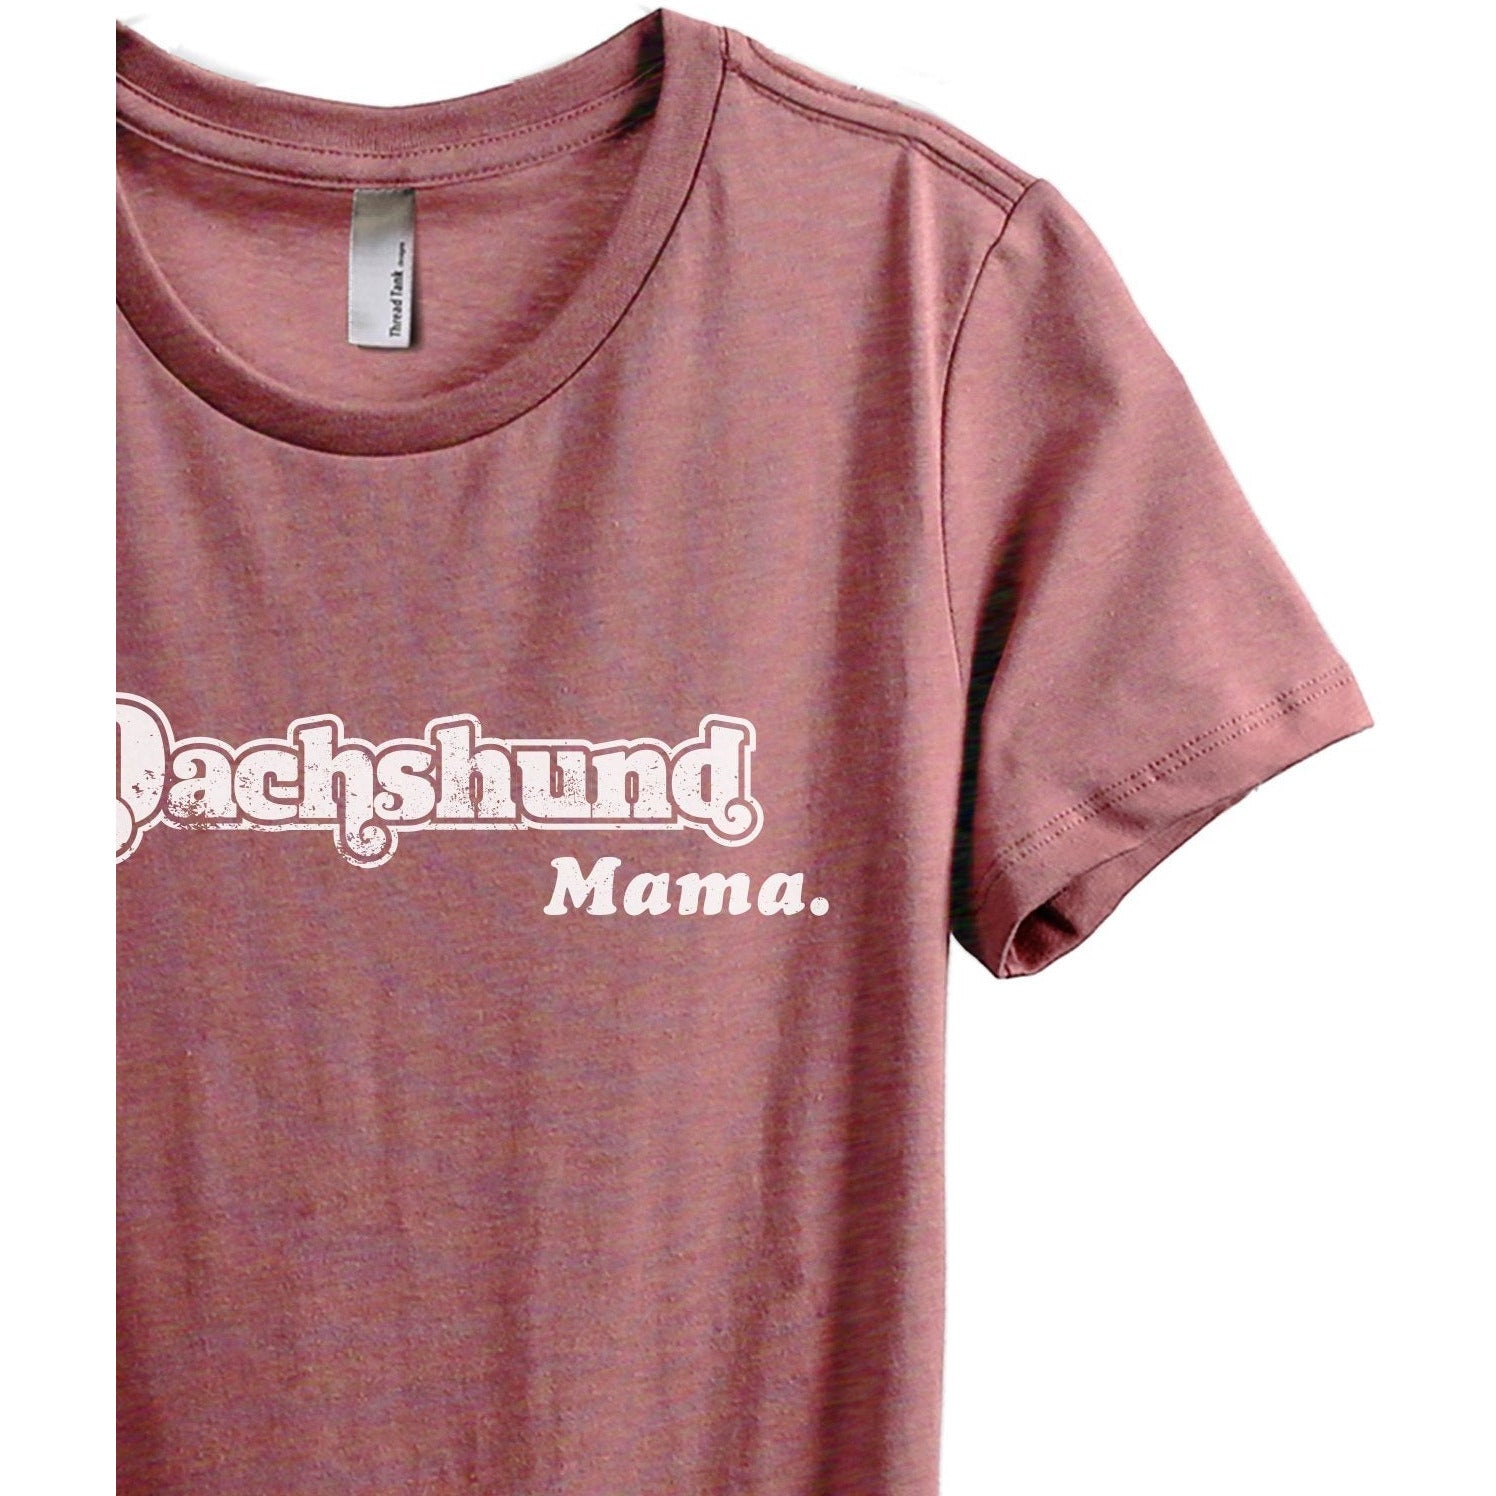 Dachshund Mama Women's Relaxed Crewneck T-Shirt Top Tee Heather Rouge Zoom Details
